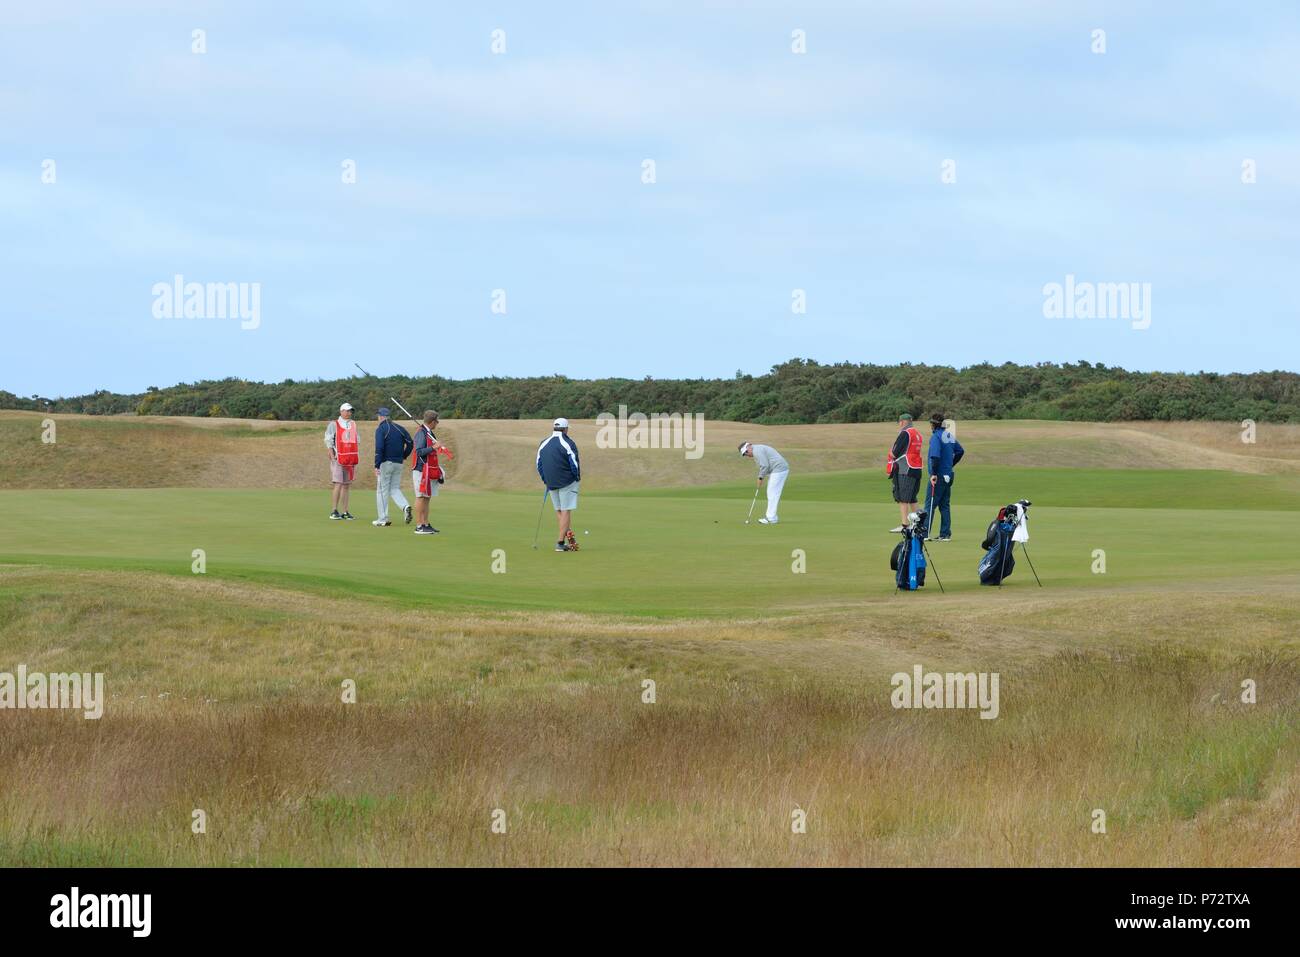 Golfers and caddies on the 18th green at the Royal Dornoch Golf Club, Sutherland, Scotland, UK Stock Photo